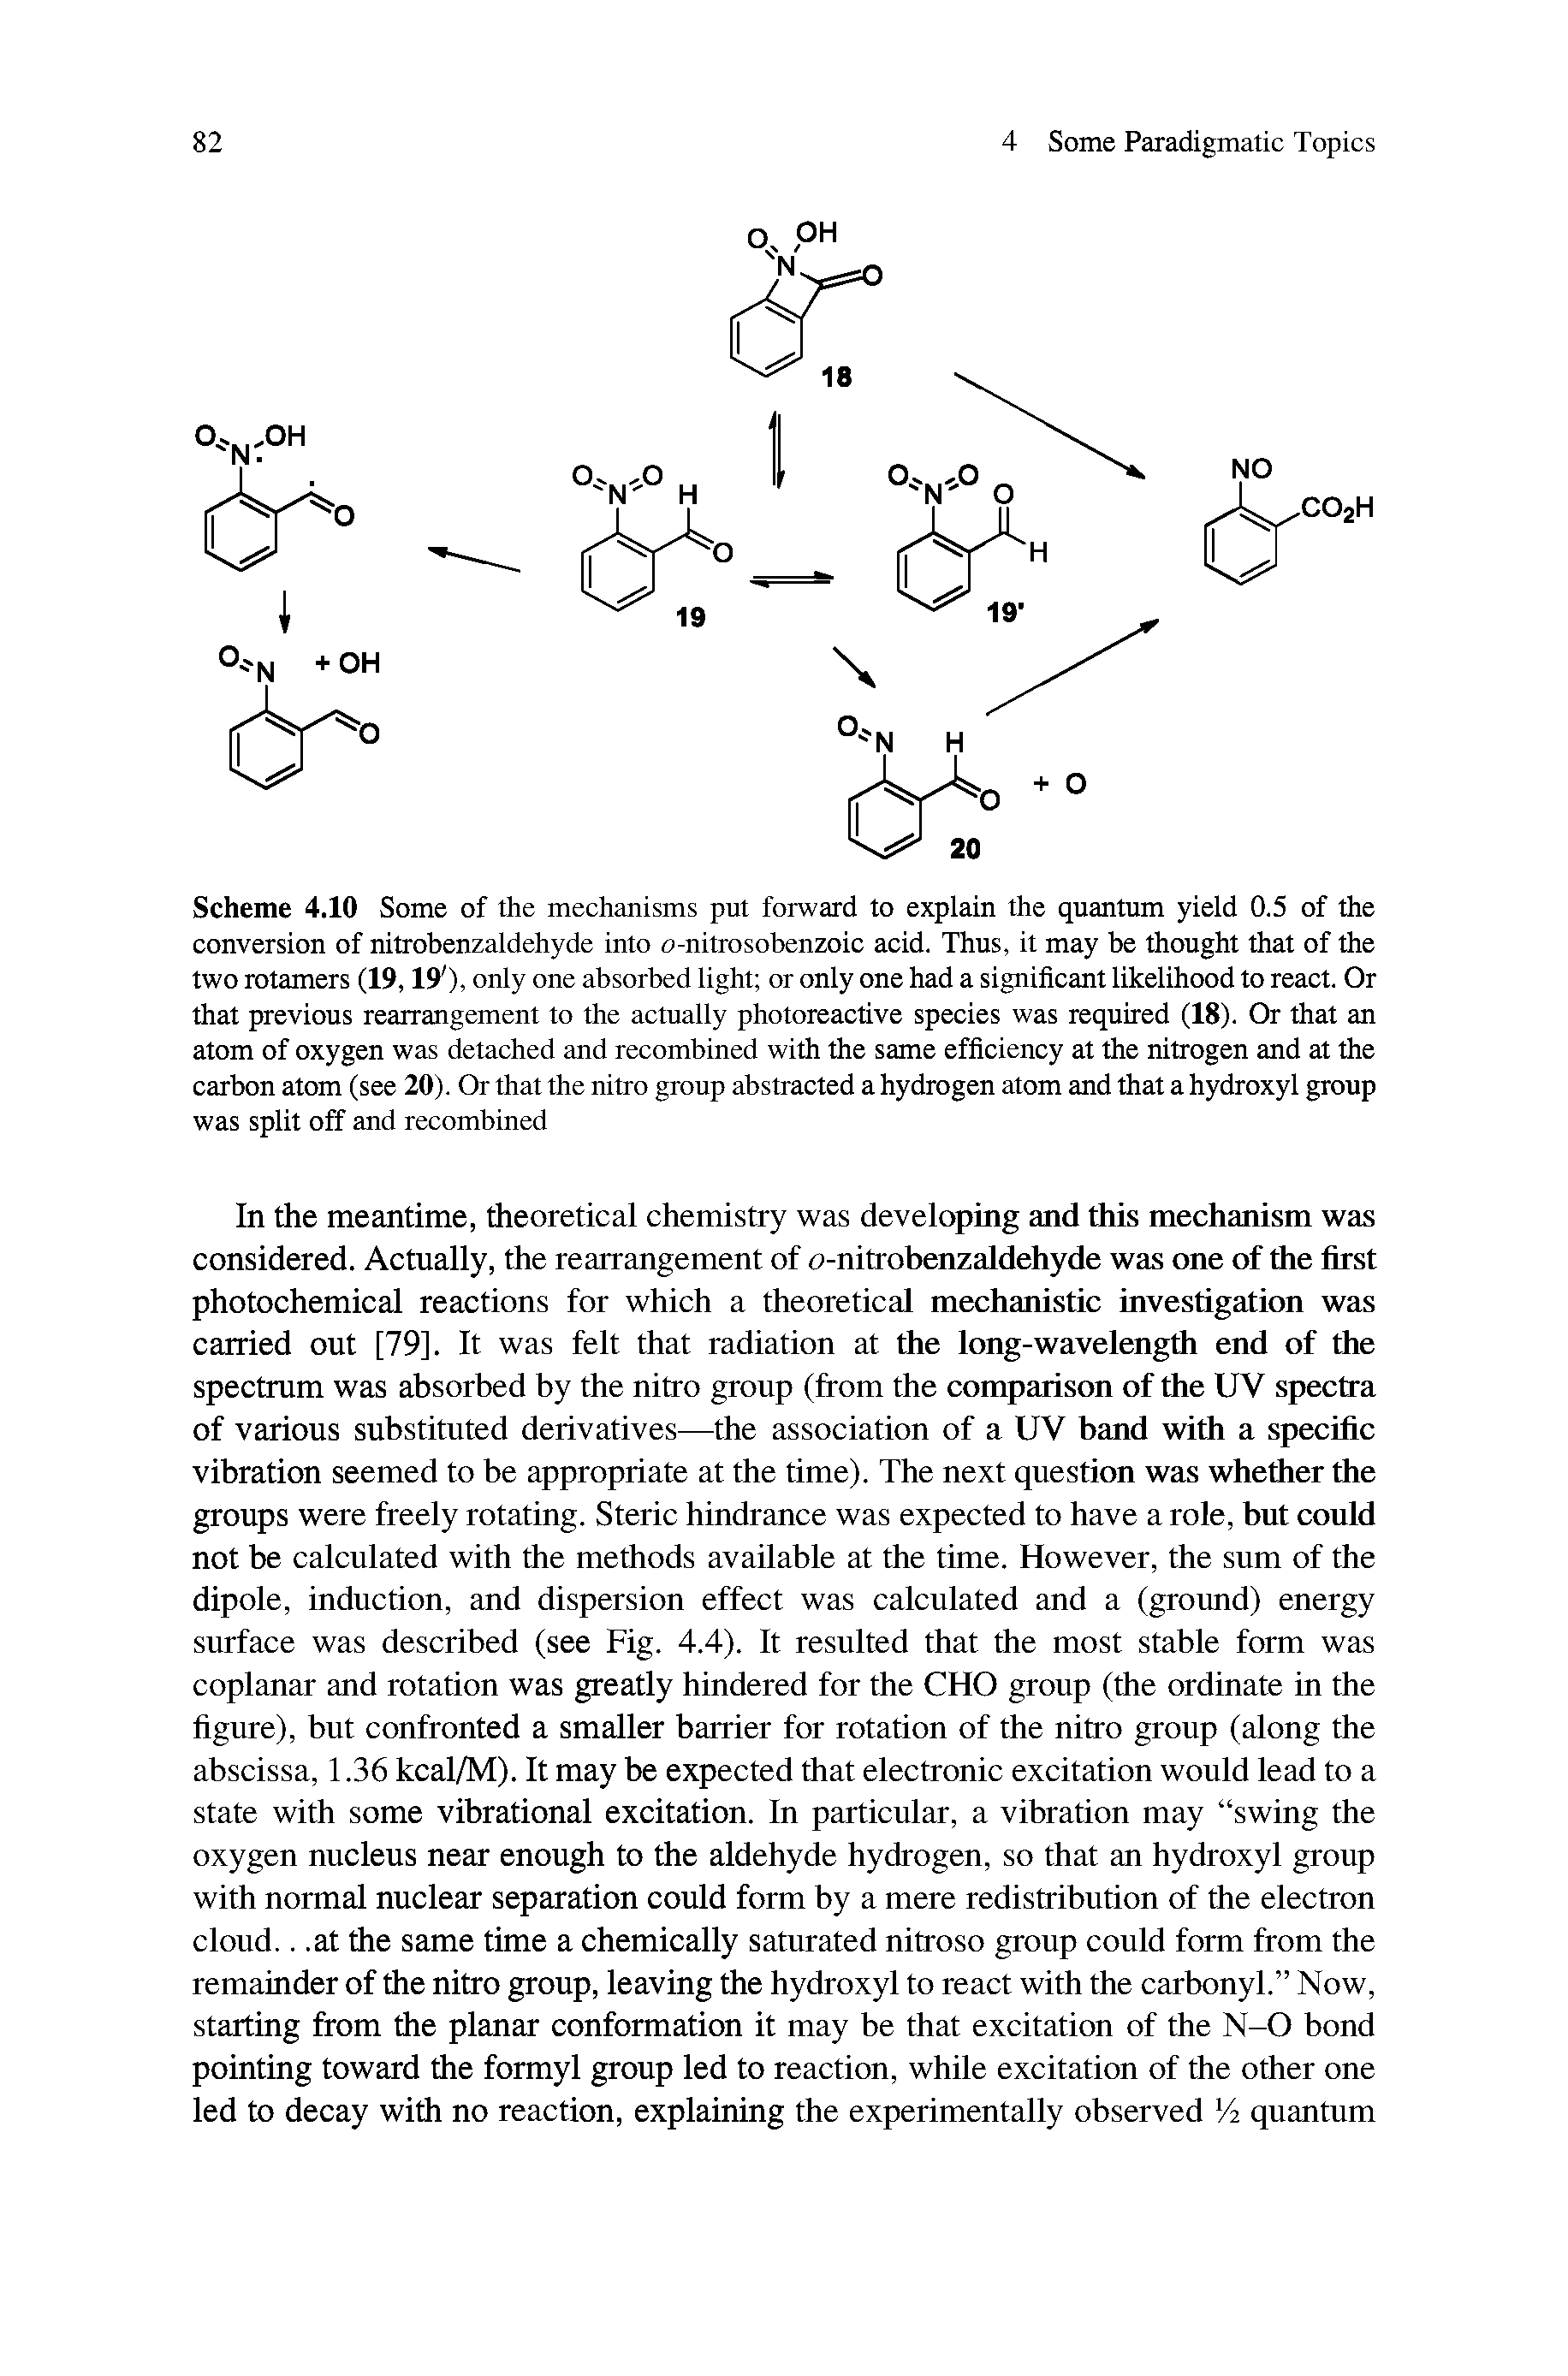 Scheme 4.10 Some of the mechanisms put forward to explain the quantum yield 0.5 of the conversion of nitrobenzaldehyde into o-nitrosobenzoic acid. Thus, it may be thought that of the two rotamers (19,19 ), only one absorbed light or only one had a significant likelihood to react. Or that previous rearrangement to the actually photoreactive species was required (18). Or that an atom of oxygen was detached and recombined with the same efficiency at the nitrogen and at the carbon atom (see 20). Or that the nitro group abstracted a hydrogen atom and that a hydroxyl group was split off and recombined...